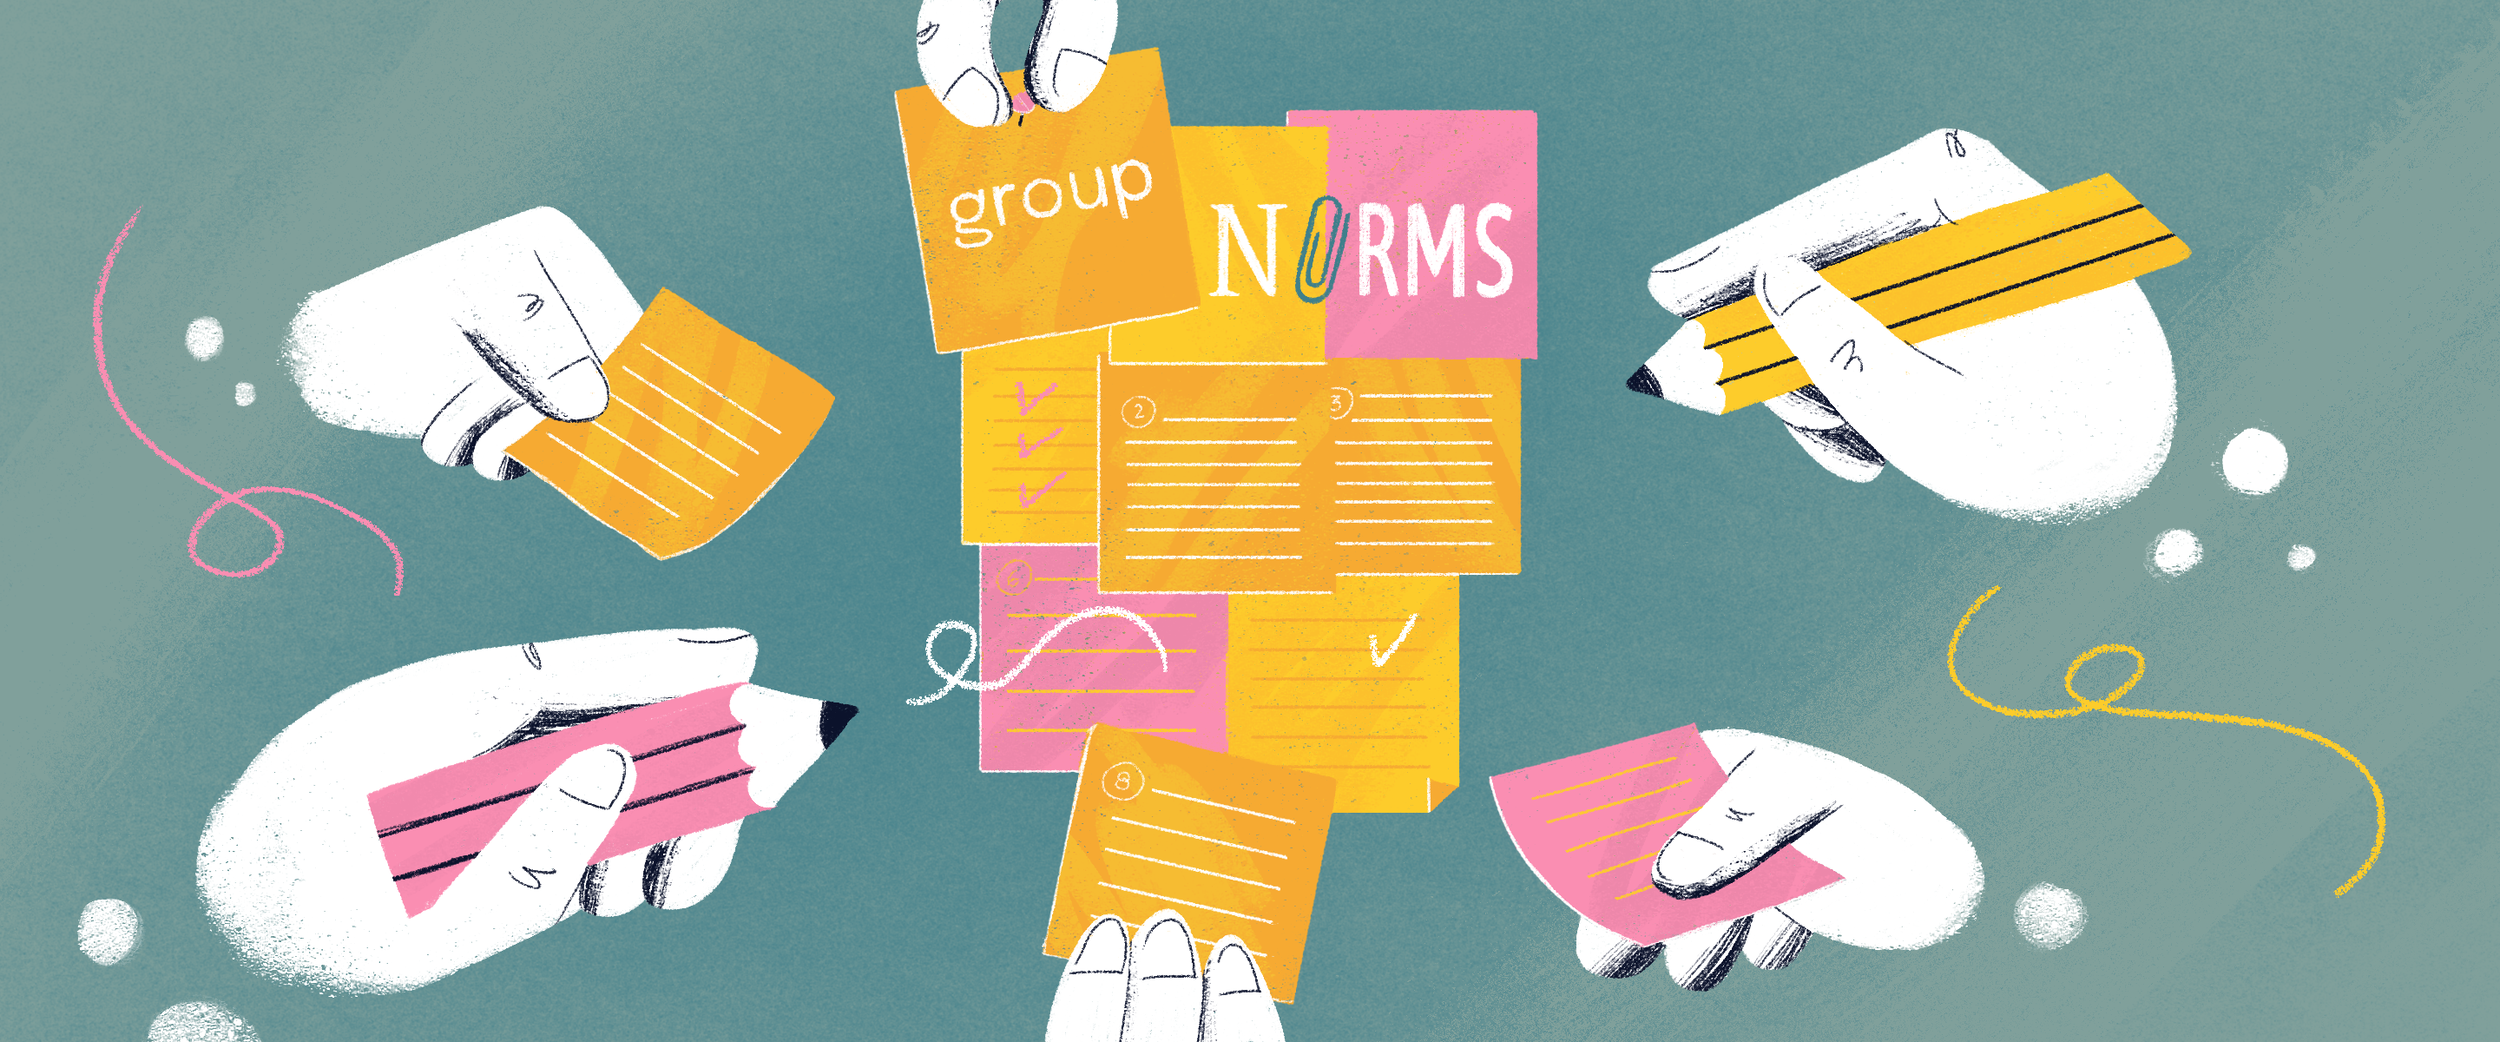 How to Create Strengthening Group Norms